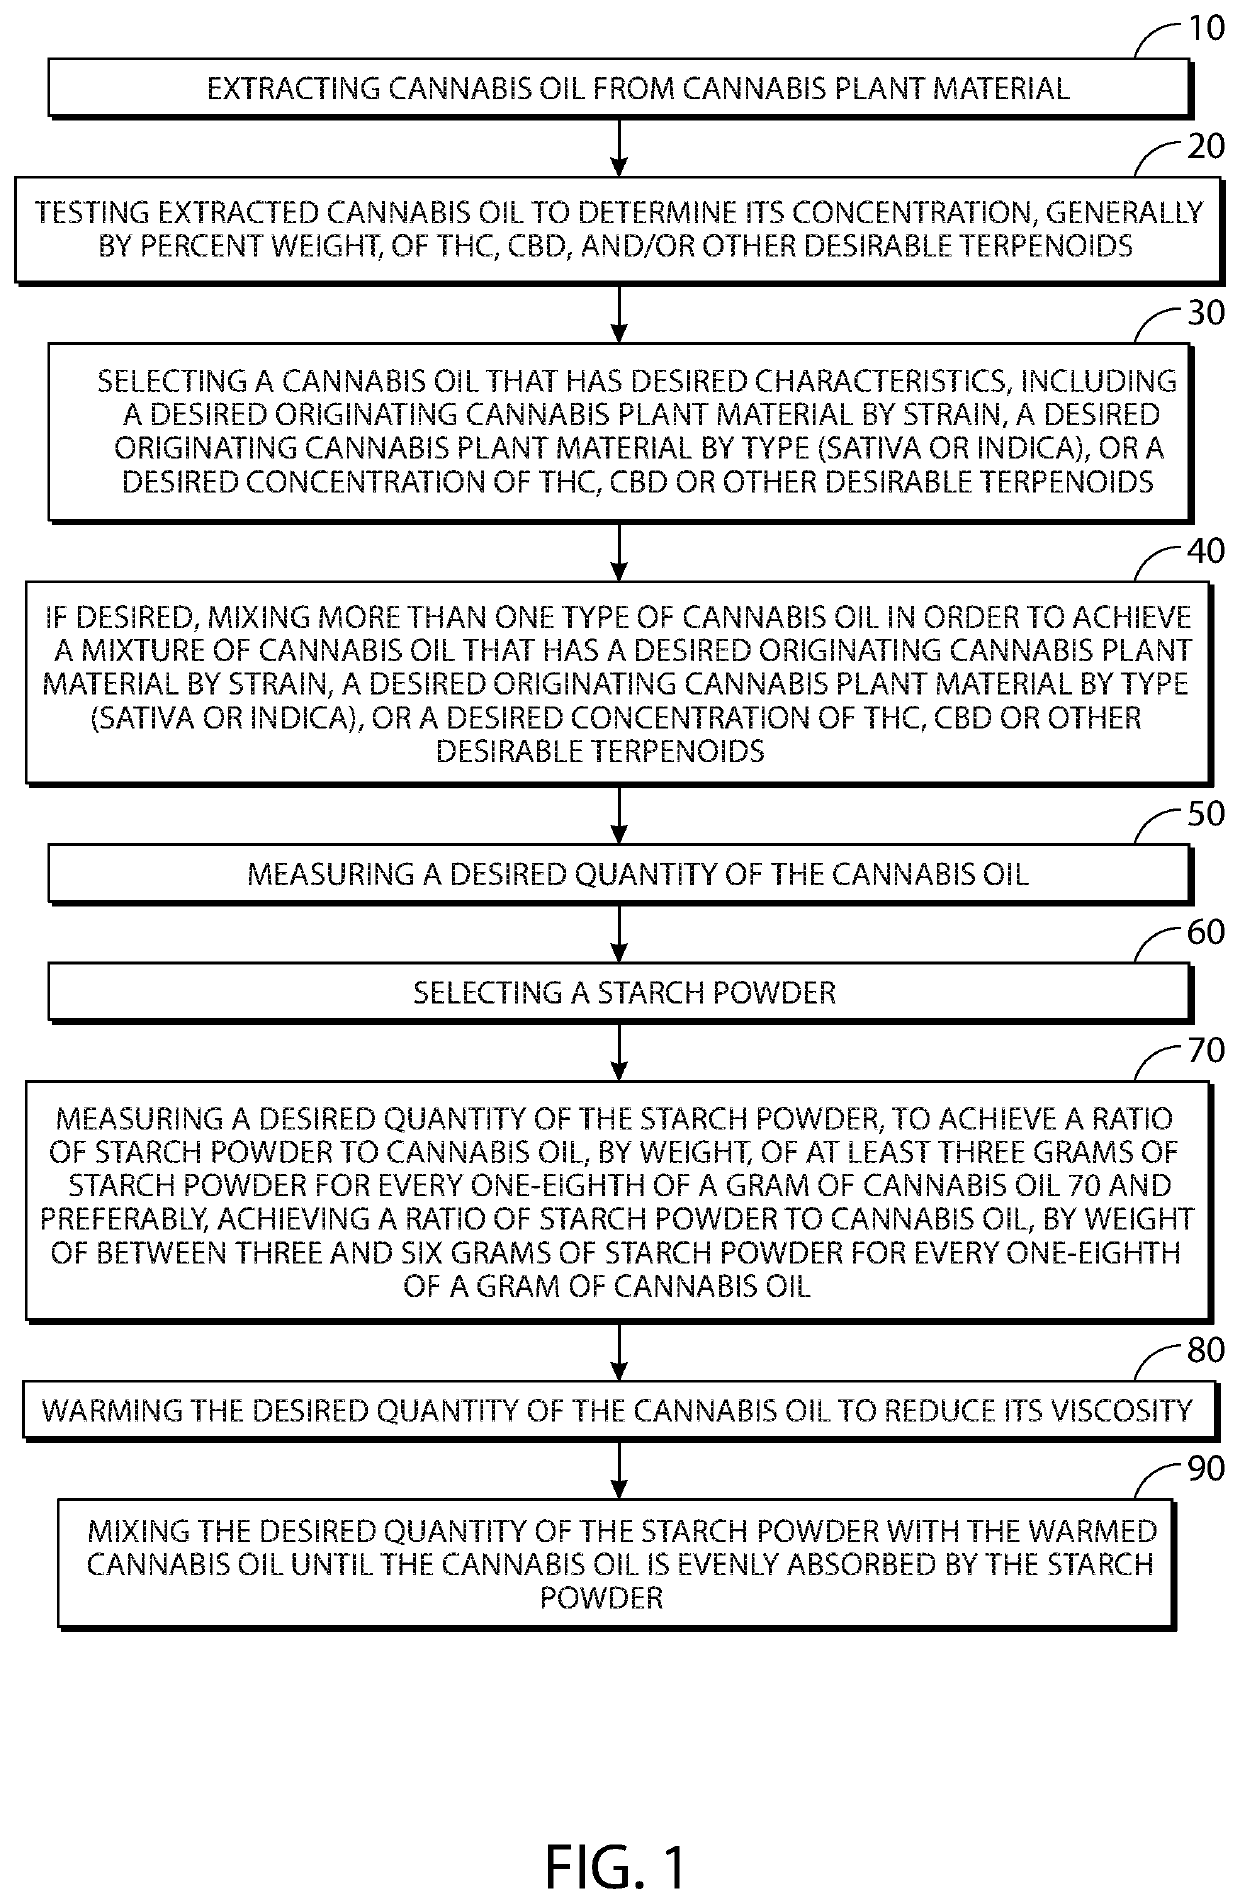 Method for conducing concentrated cannabis oil to be stable, emulsifiable and flavorless for use in hot beverages and resulting powderized cannabis oil